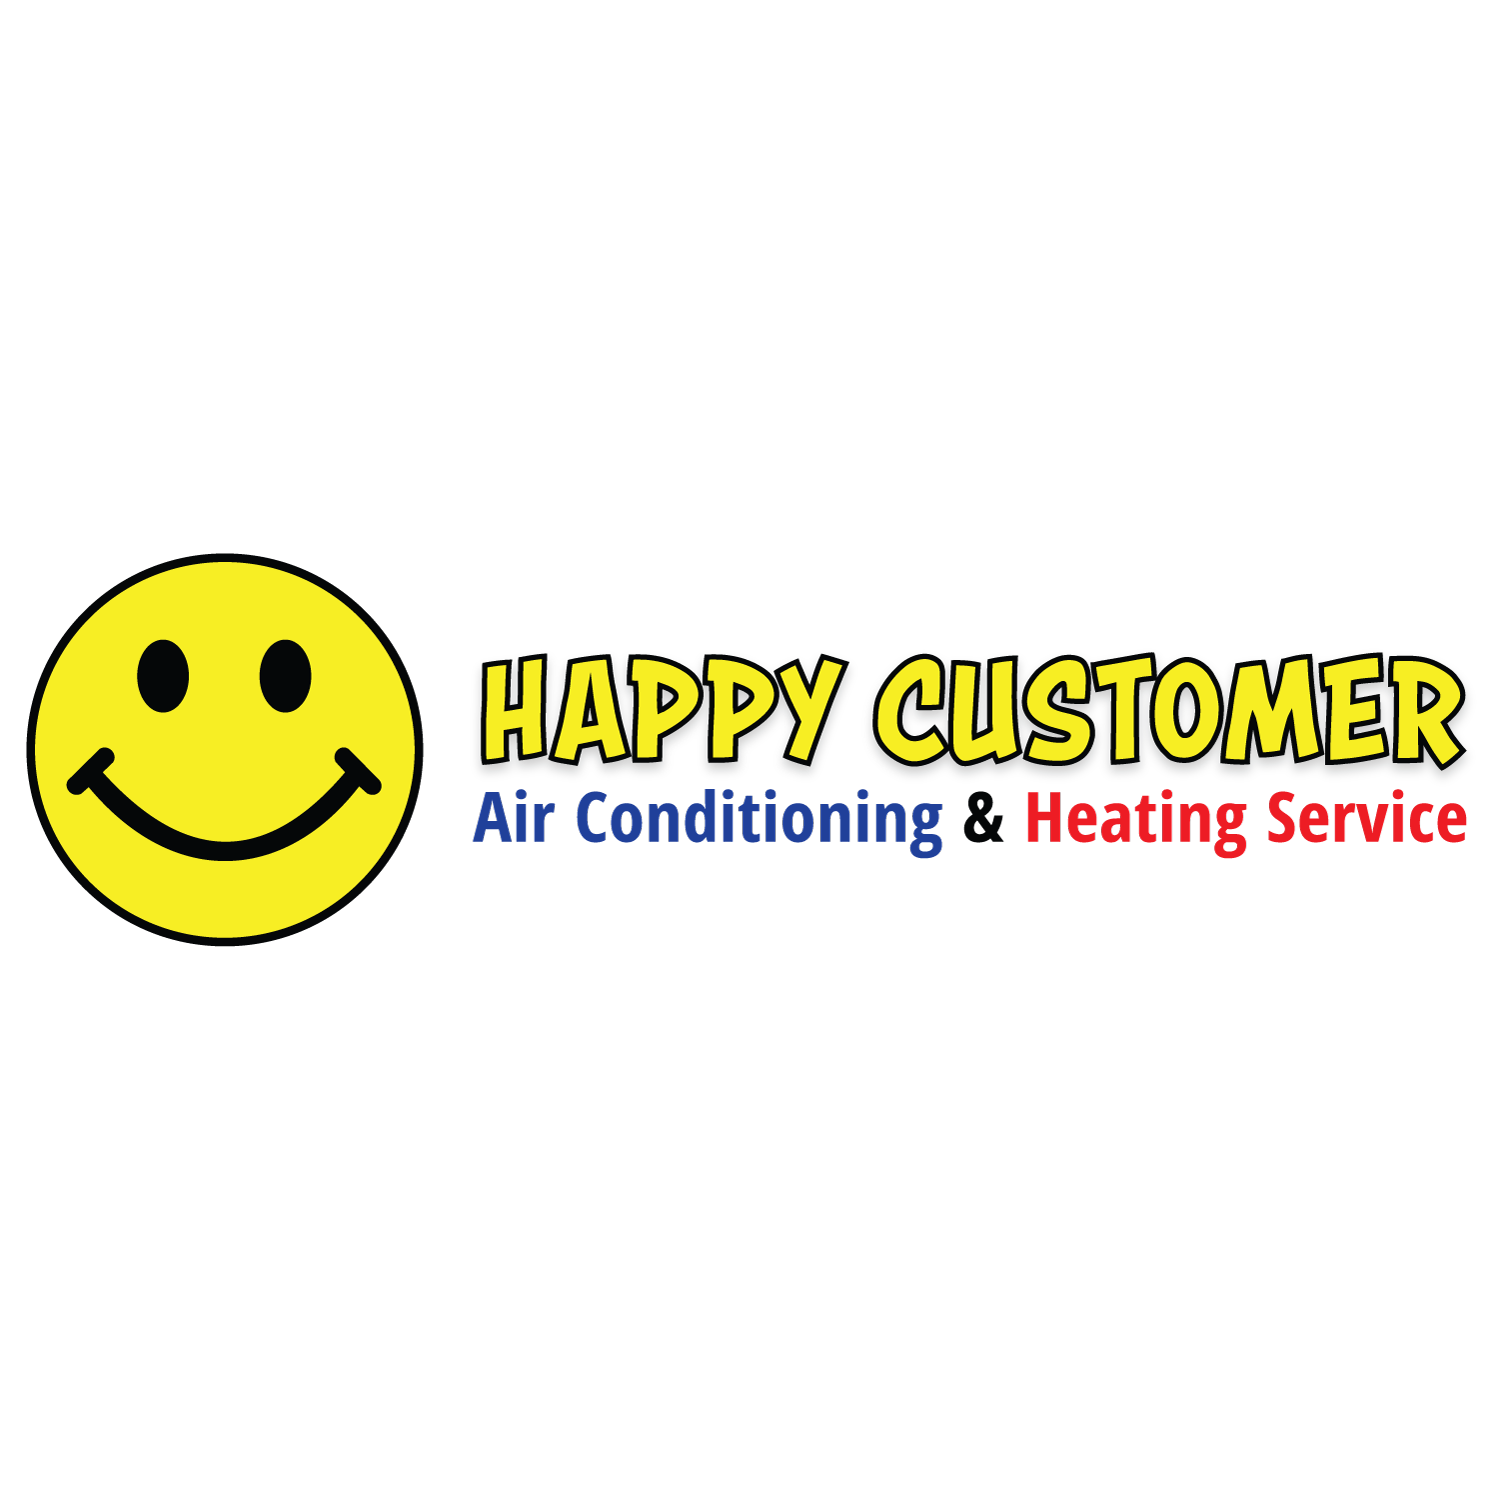 Happy Customer Air Conditioning & Heating Service